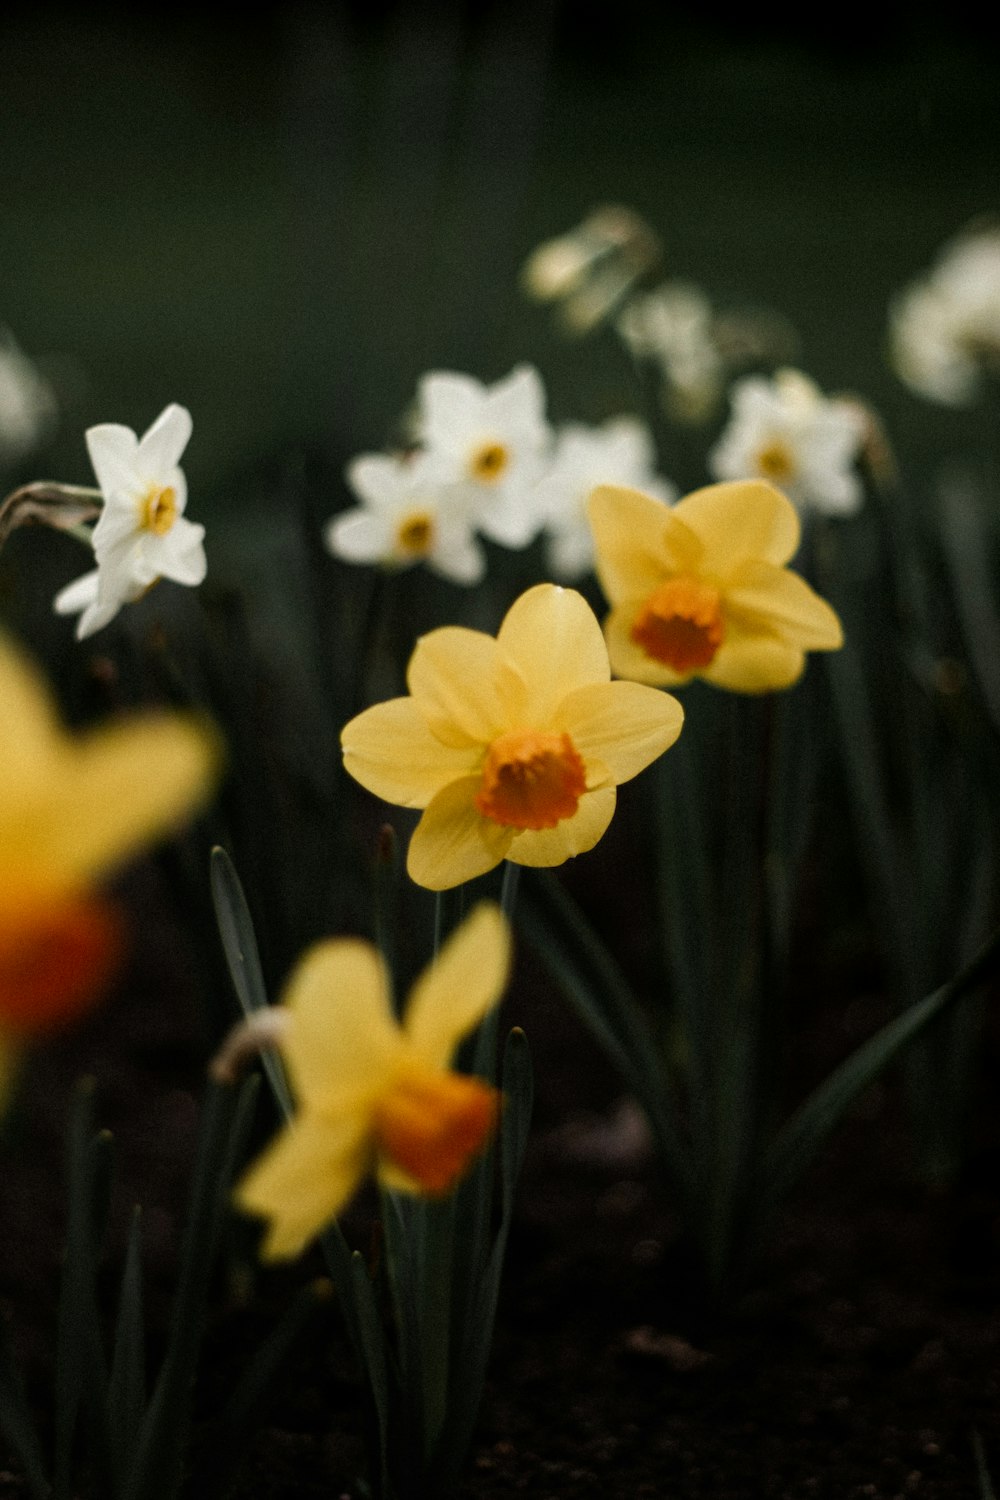 a group of yellow and white daffodils